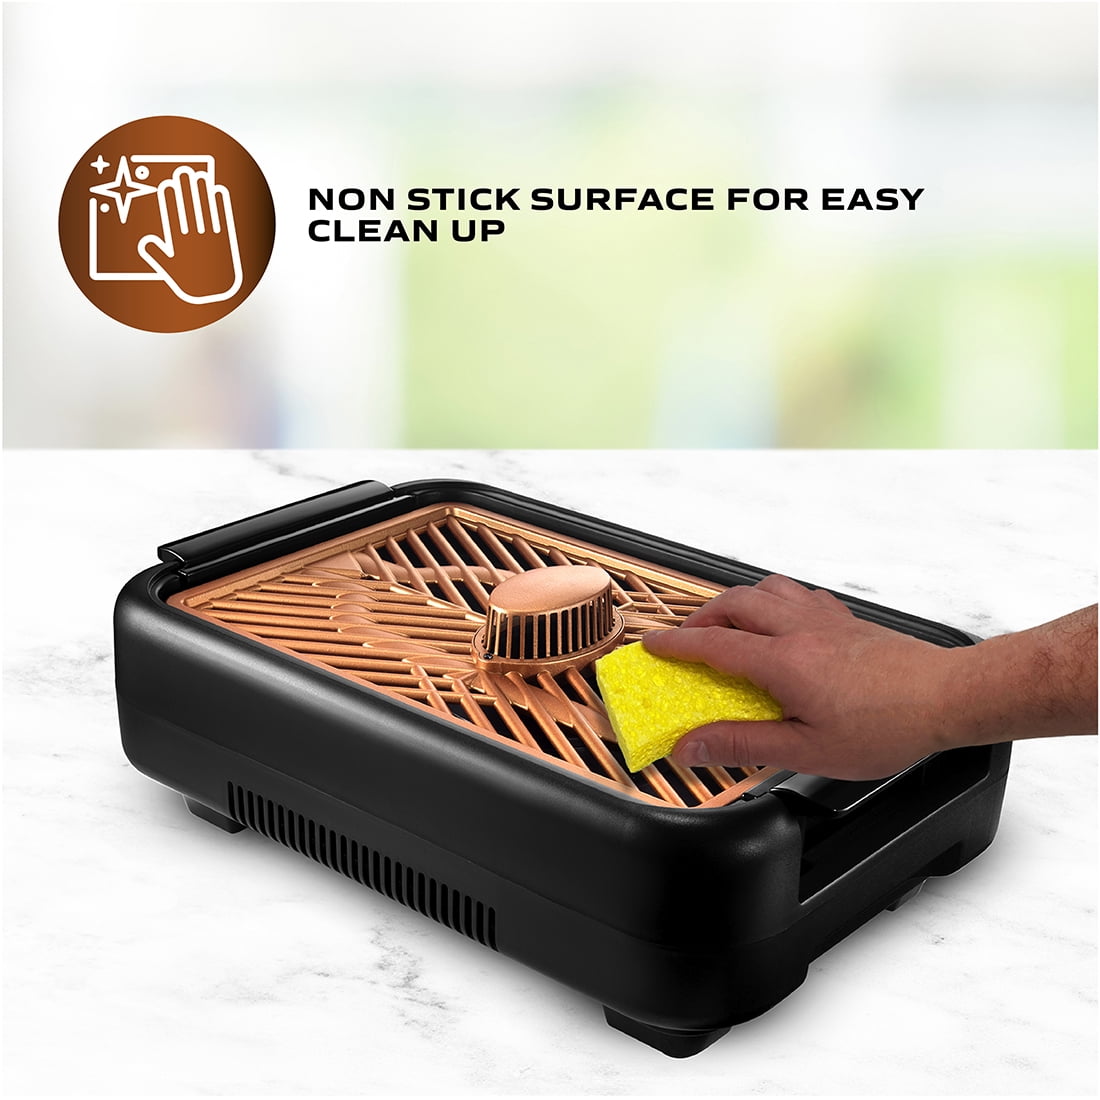 Gotham Steel Smokeless Grill with Fan, Indoor Grill Ultra Nonstick Electric Grill Dishwasher Safe Surface, Temp Control, Metal Utensil Safe, Barbeque Indoor Grill, As Seen on TV - 3